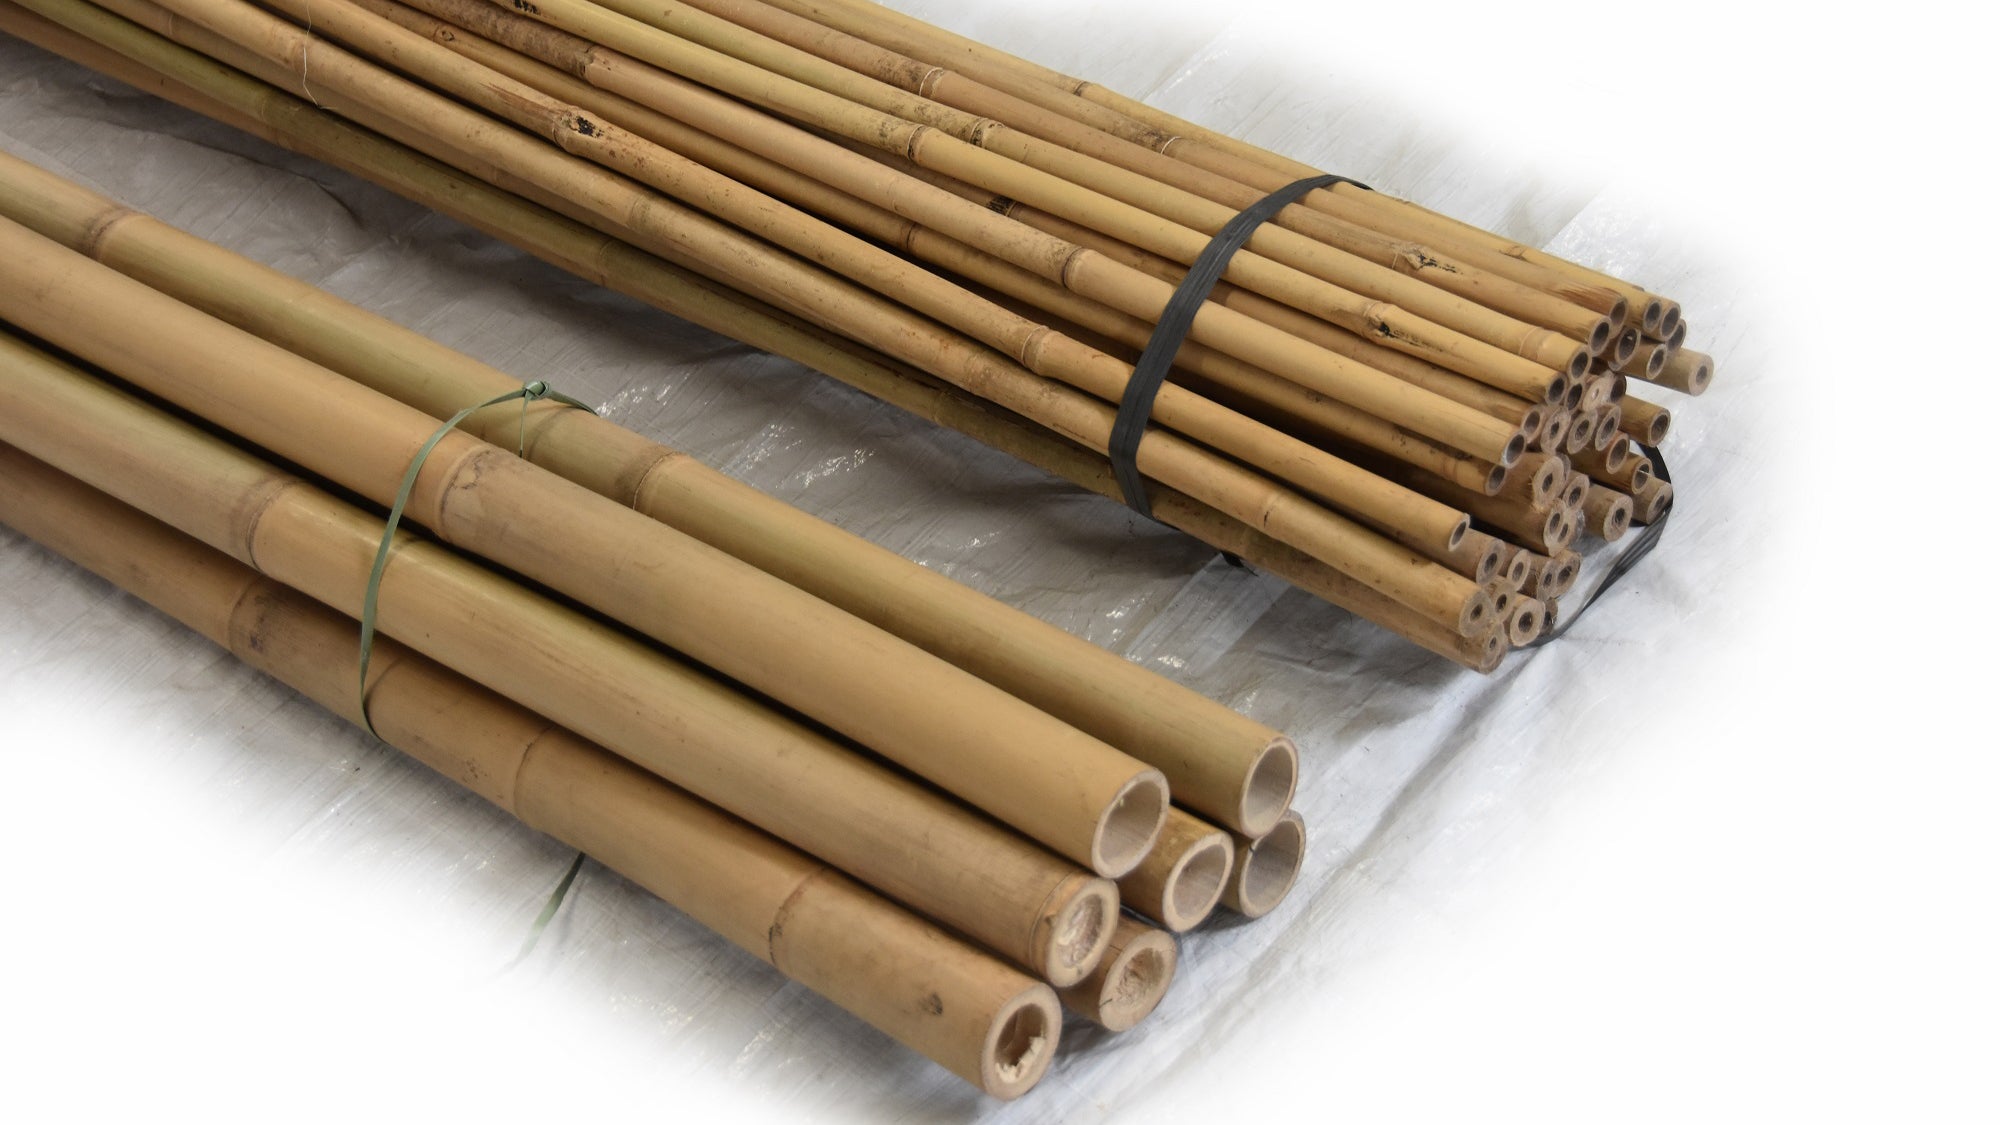 Wholesale Bamboo Rods - Buy Reliable Bamboo Rods from